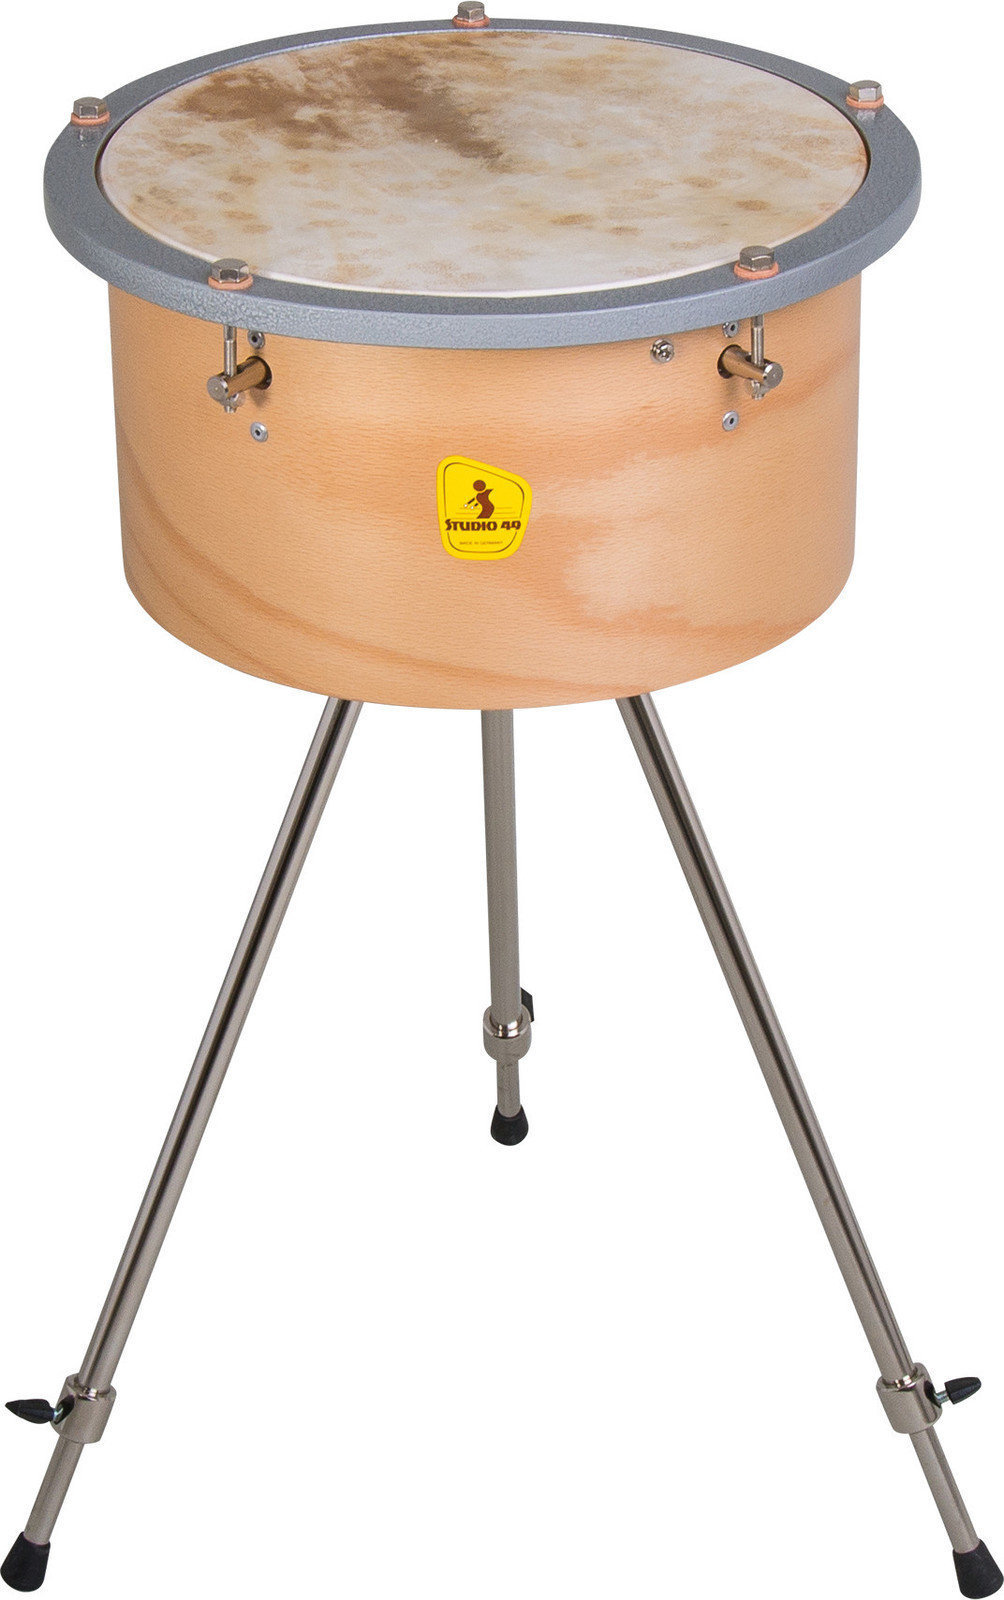 Orchestral Percussion Studio 49 DP-300 Rotary